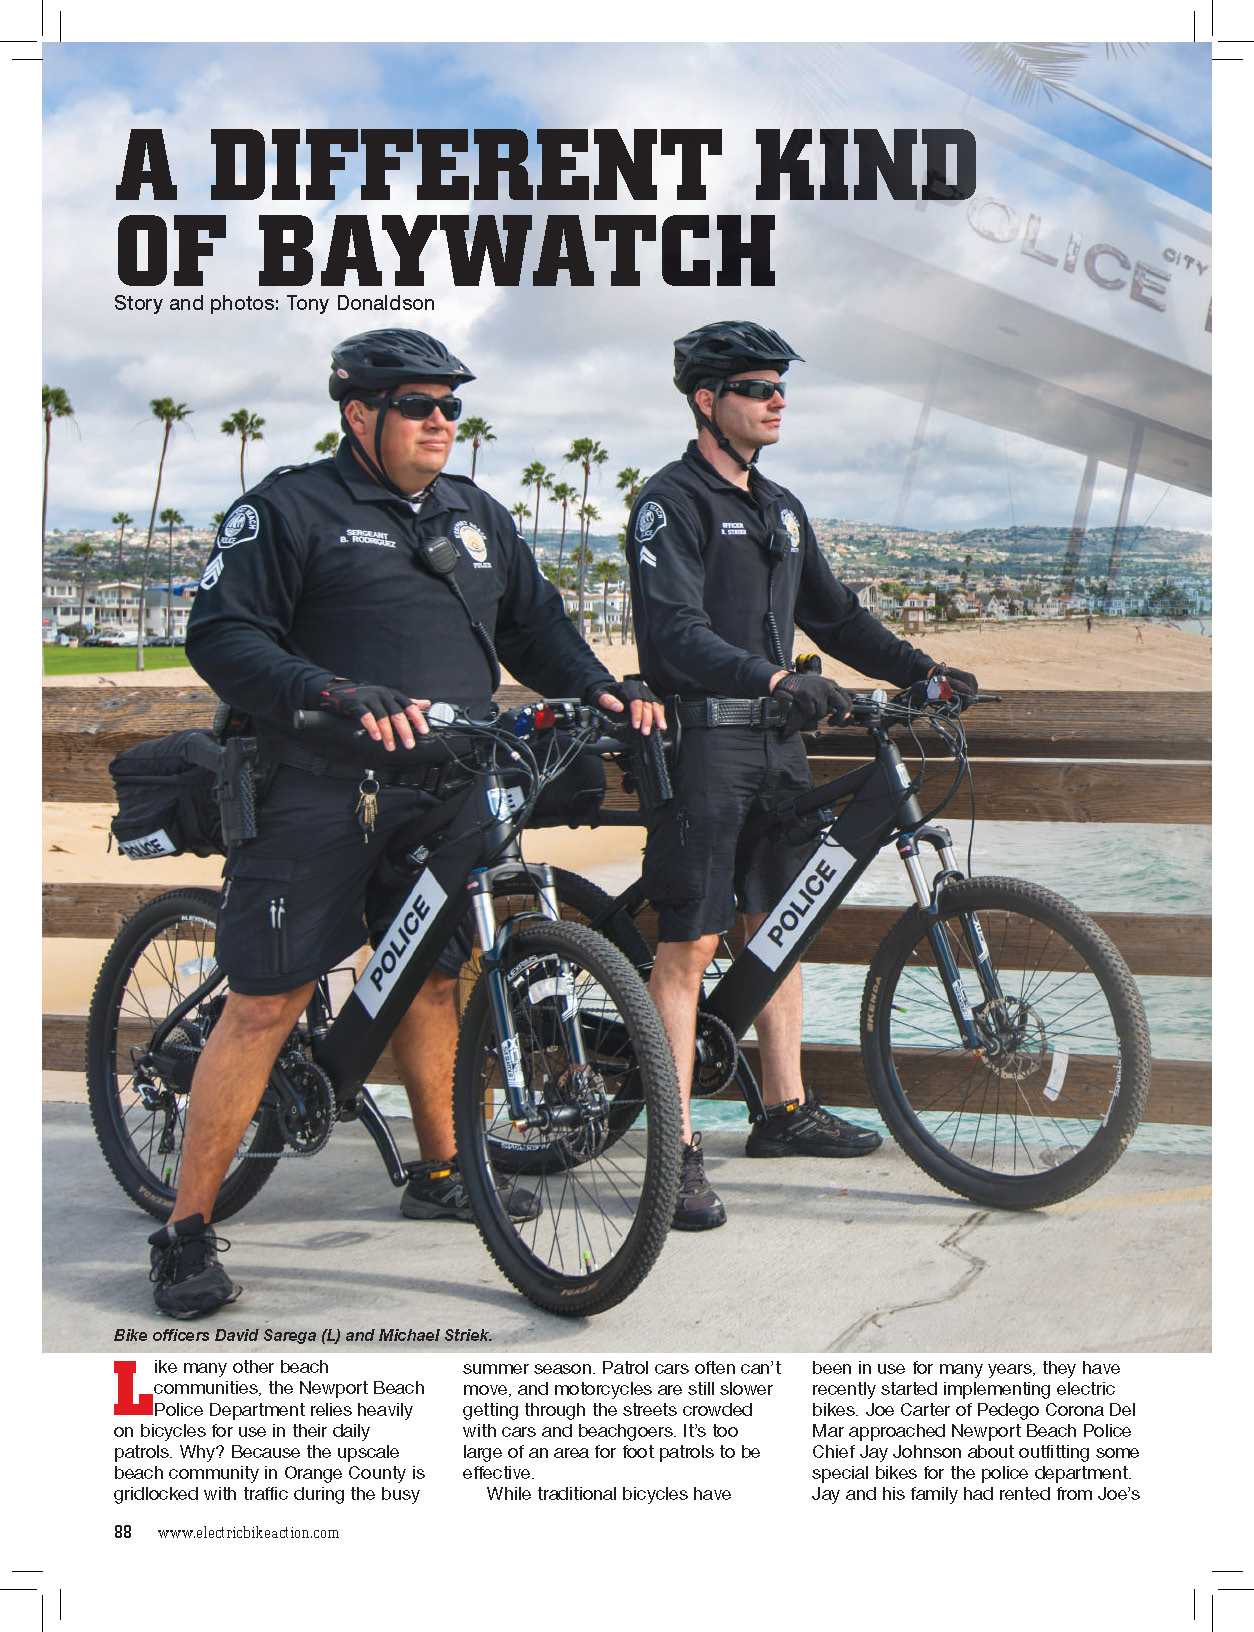 A Different Kind of Baywatch: E-Bikes for Law Enforcement